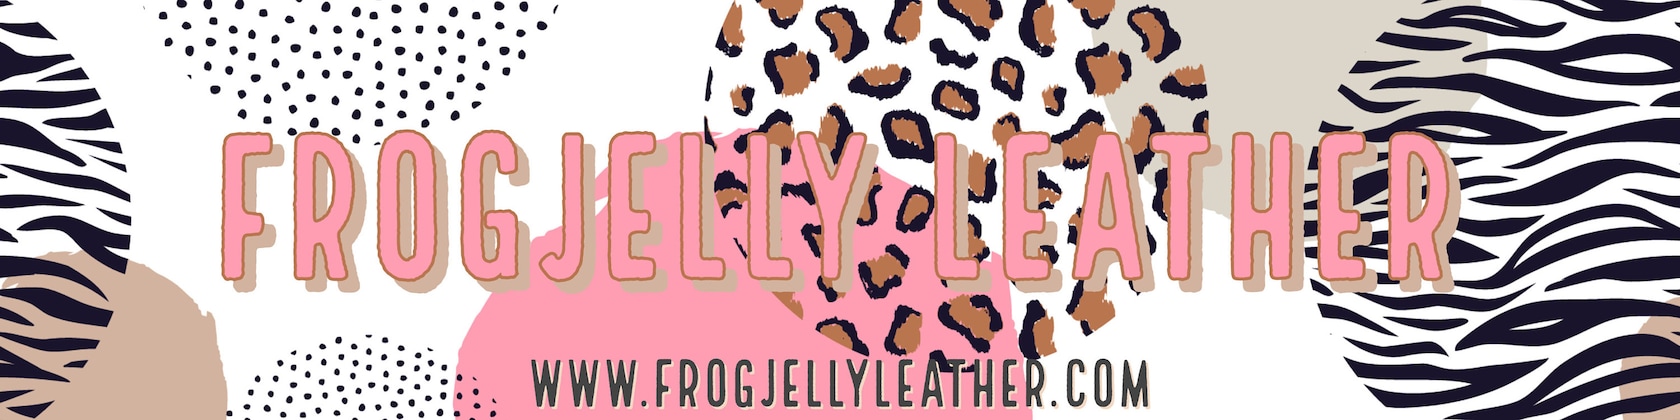 Frogjelly Leather Cotton Candy Pink Extra Fine Glitter Faux Leather